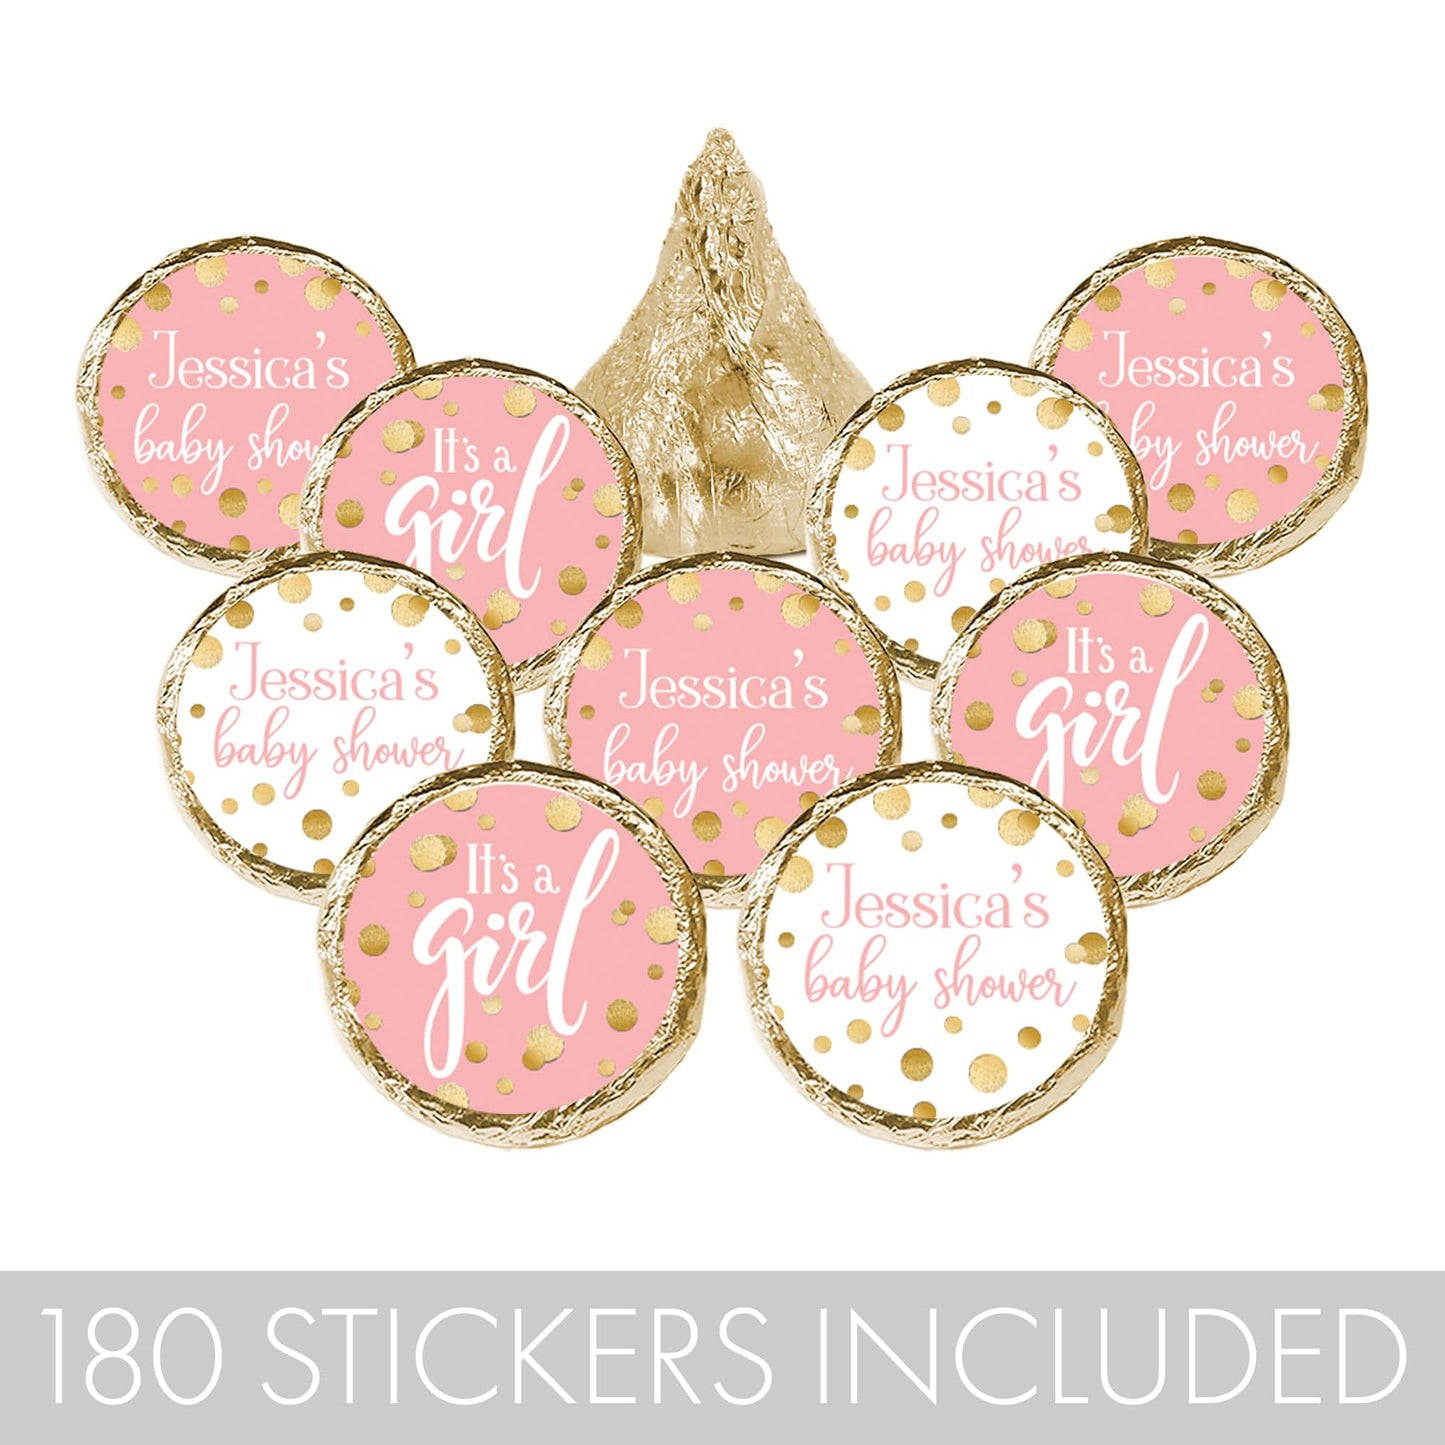 Personalized Pink and Gold Girl Baby Shower Favor Stickers - 180 ct